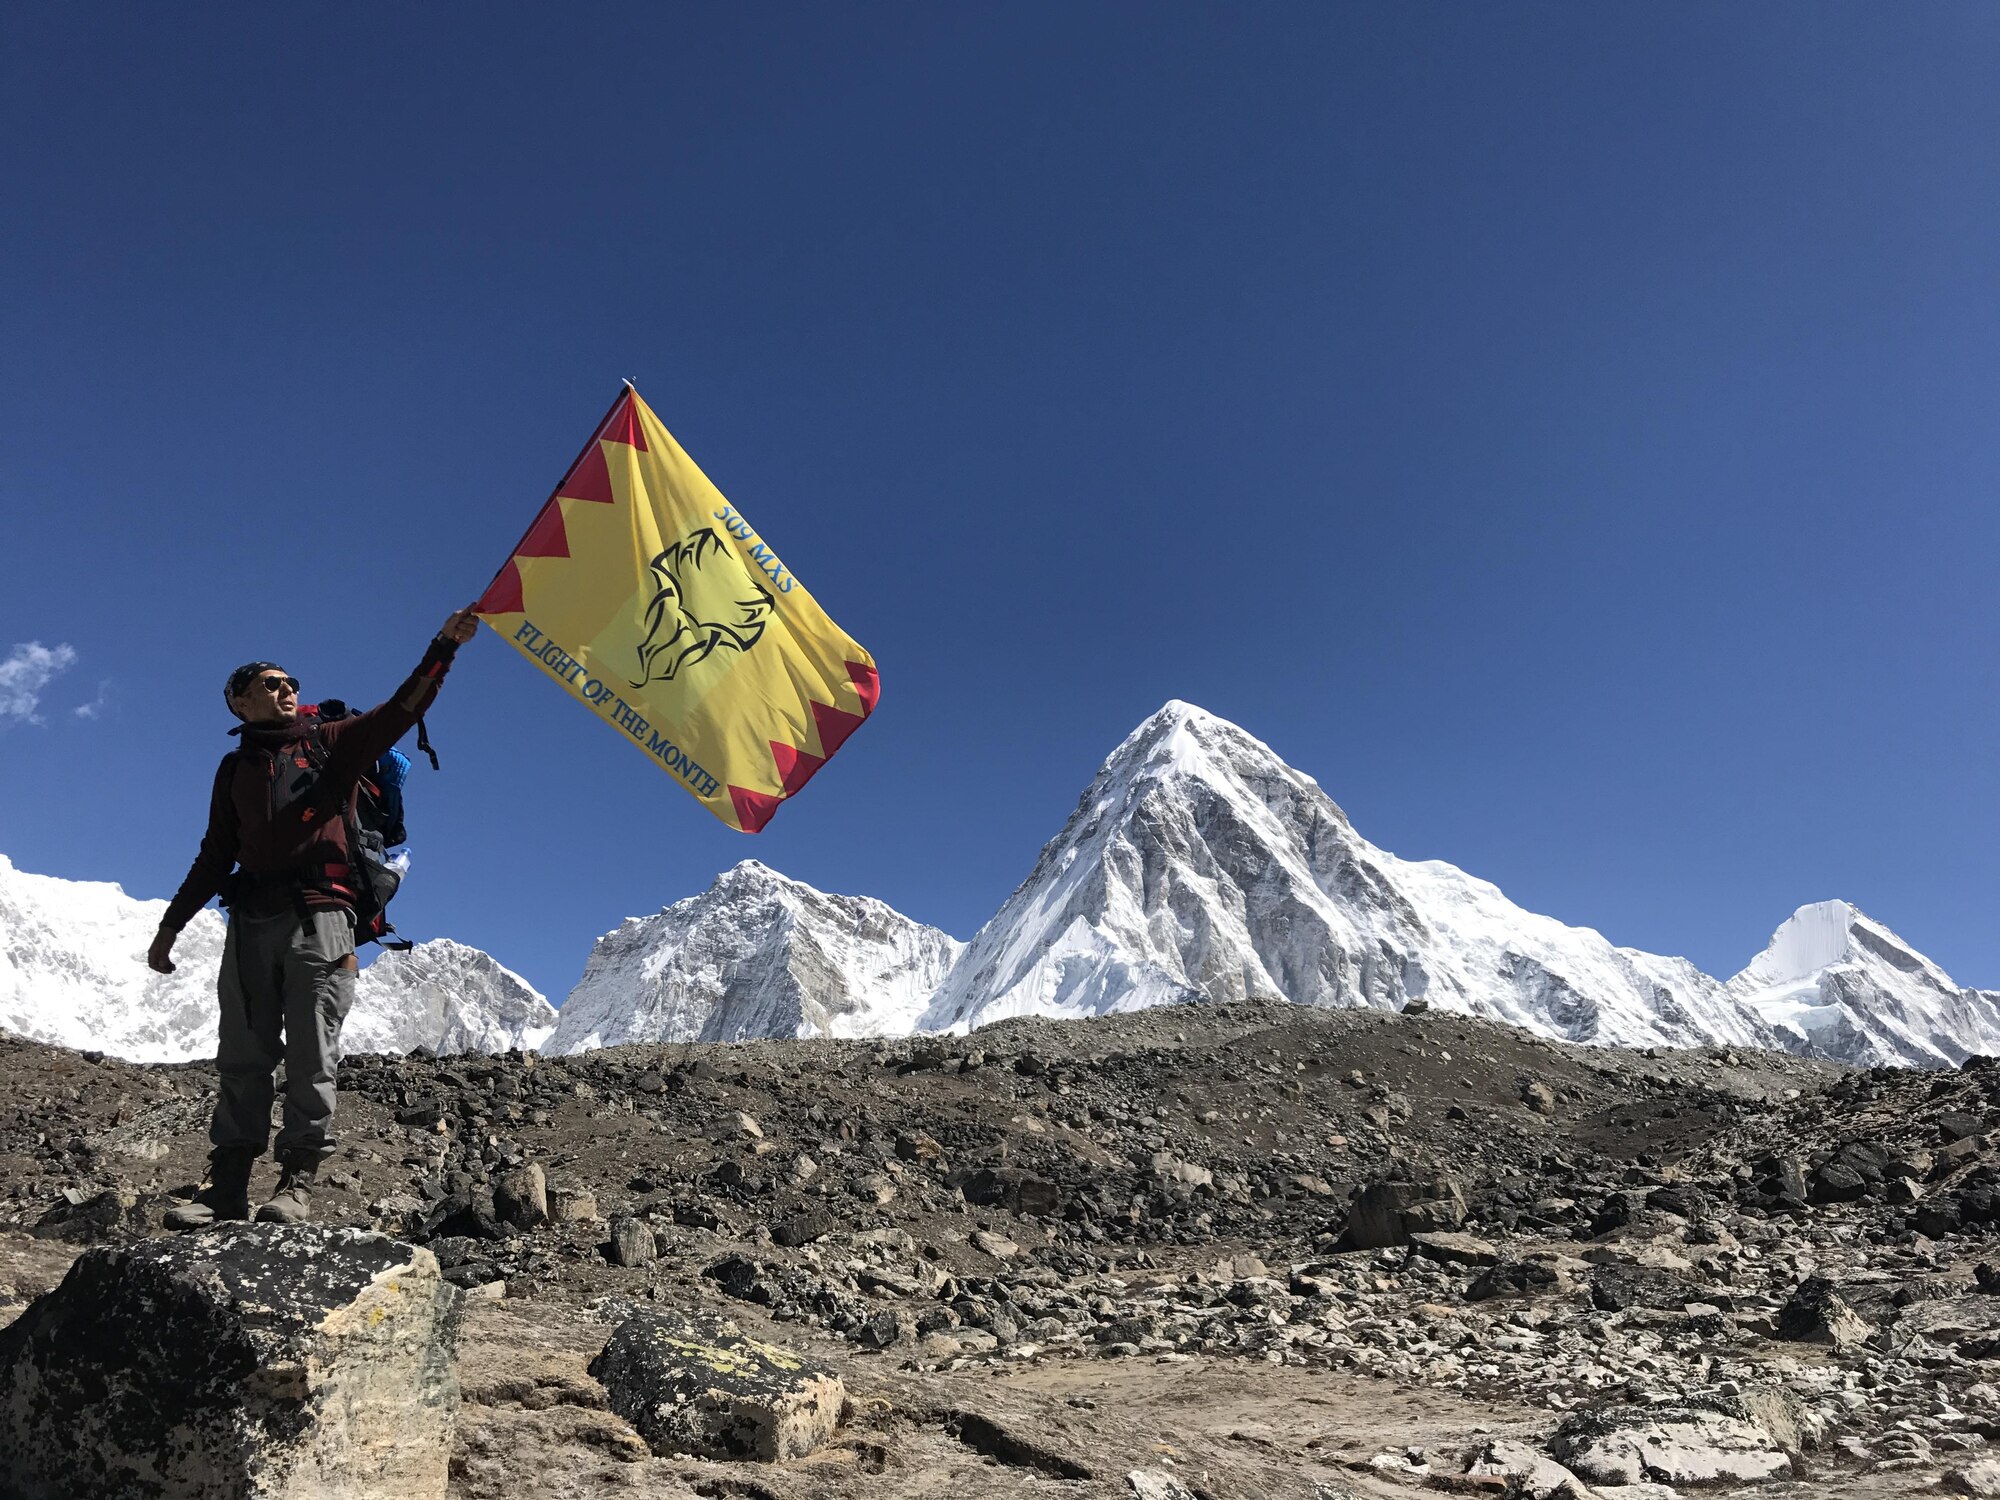 Senior Airman Sukh Bhandari, an aerospace ground equipment journeyman of the 509th Maintenance Squadron, stands with the squadron’s deployment flag at Mount Everest South Base Camp May 20, 2017.  This base camp is located at an altitude of approximately 17,500 feet in Nepal. Along with Bhandari, Airman 1st Class Anish Chauhan and Senior Airman Shane Hoag, both water and fuel systems management journeymen of the 509th Civil Engineer Squadron, made the hike as well. (courtesy photo)